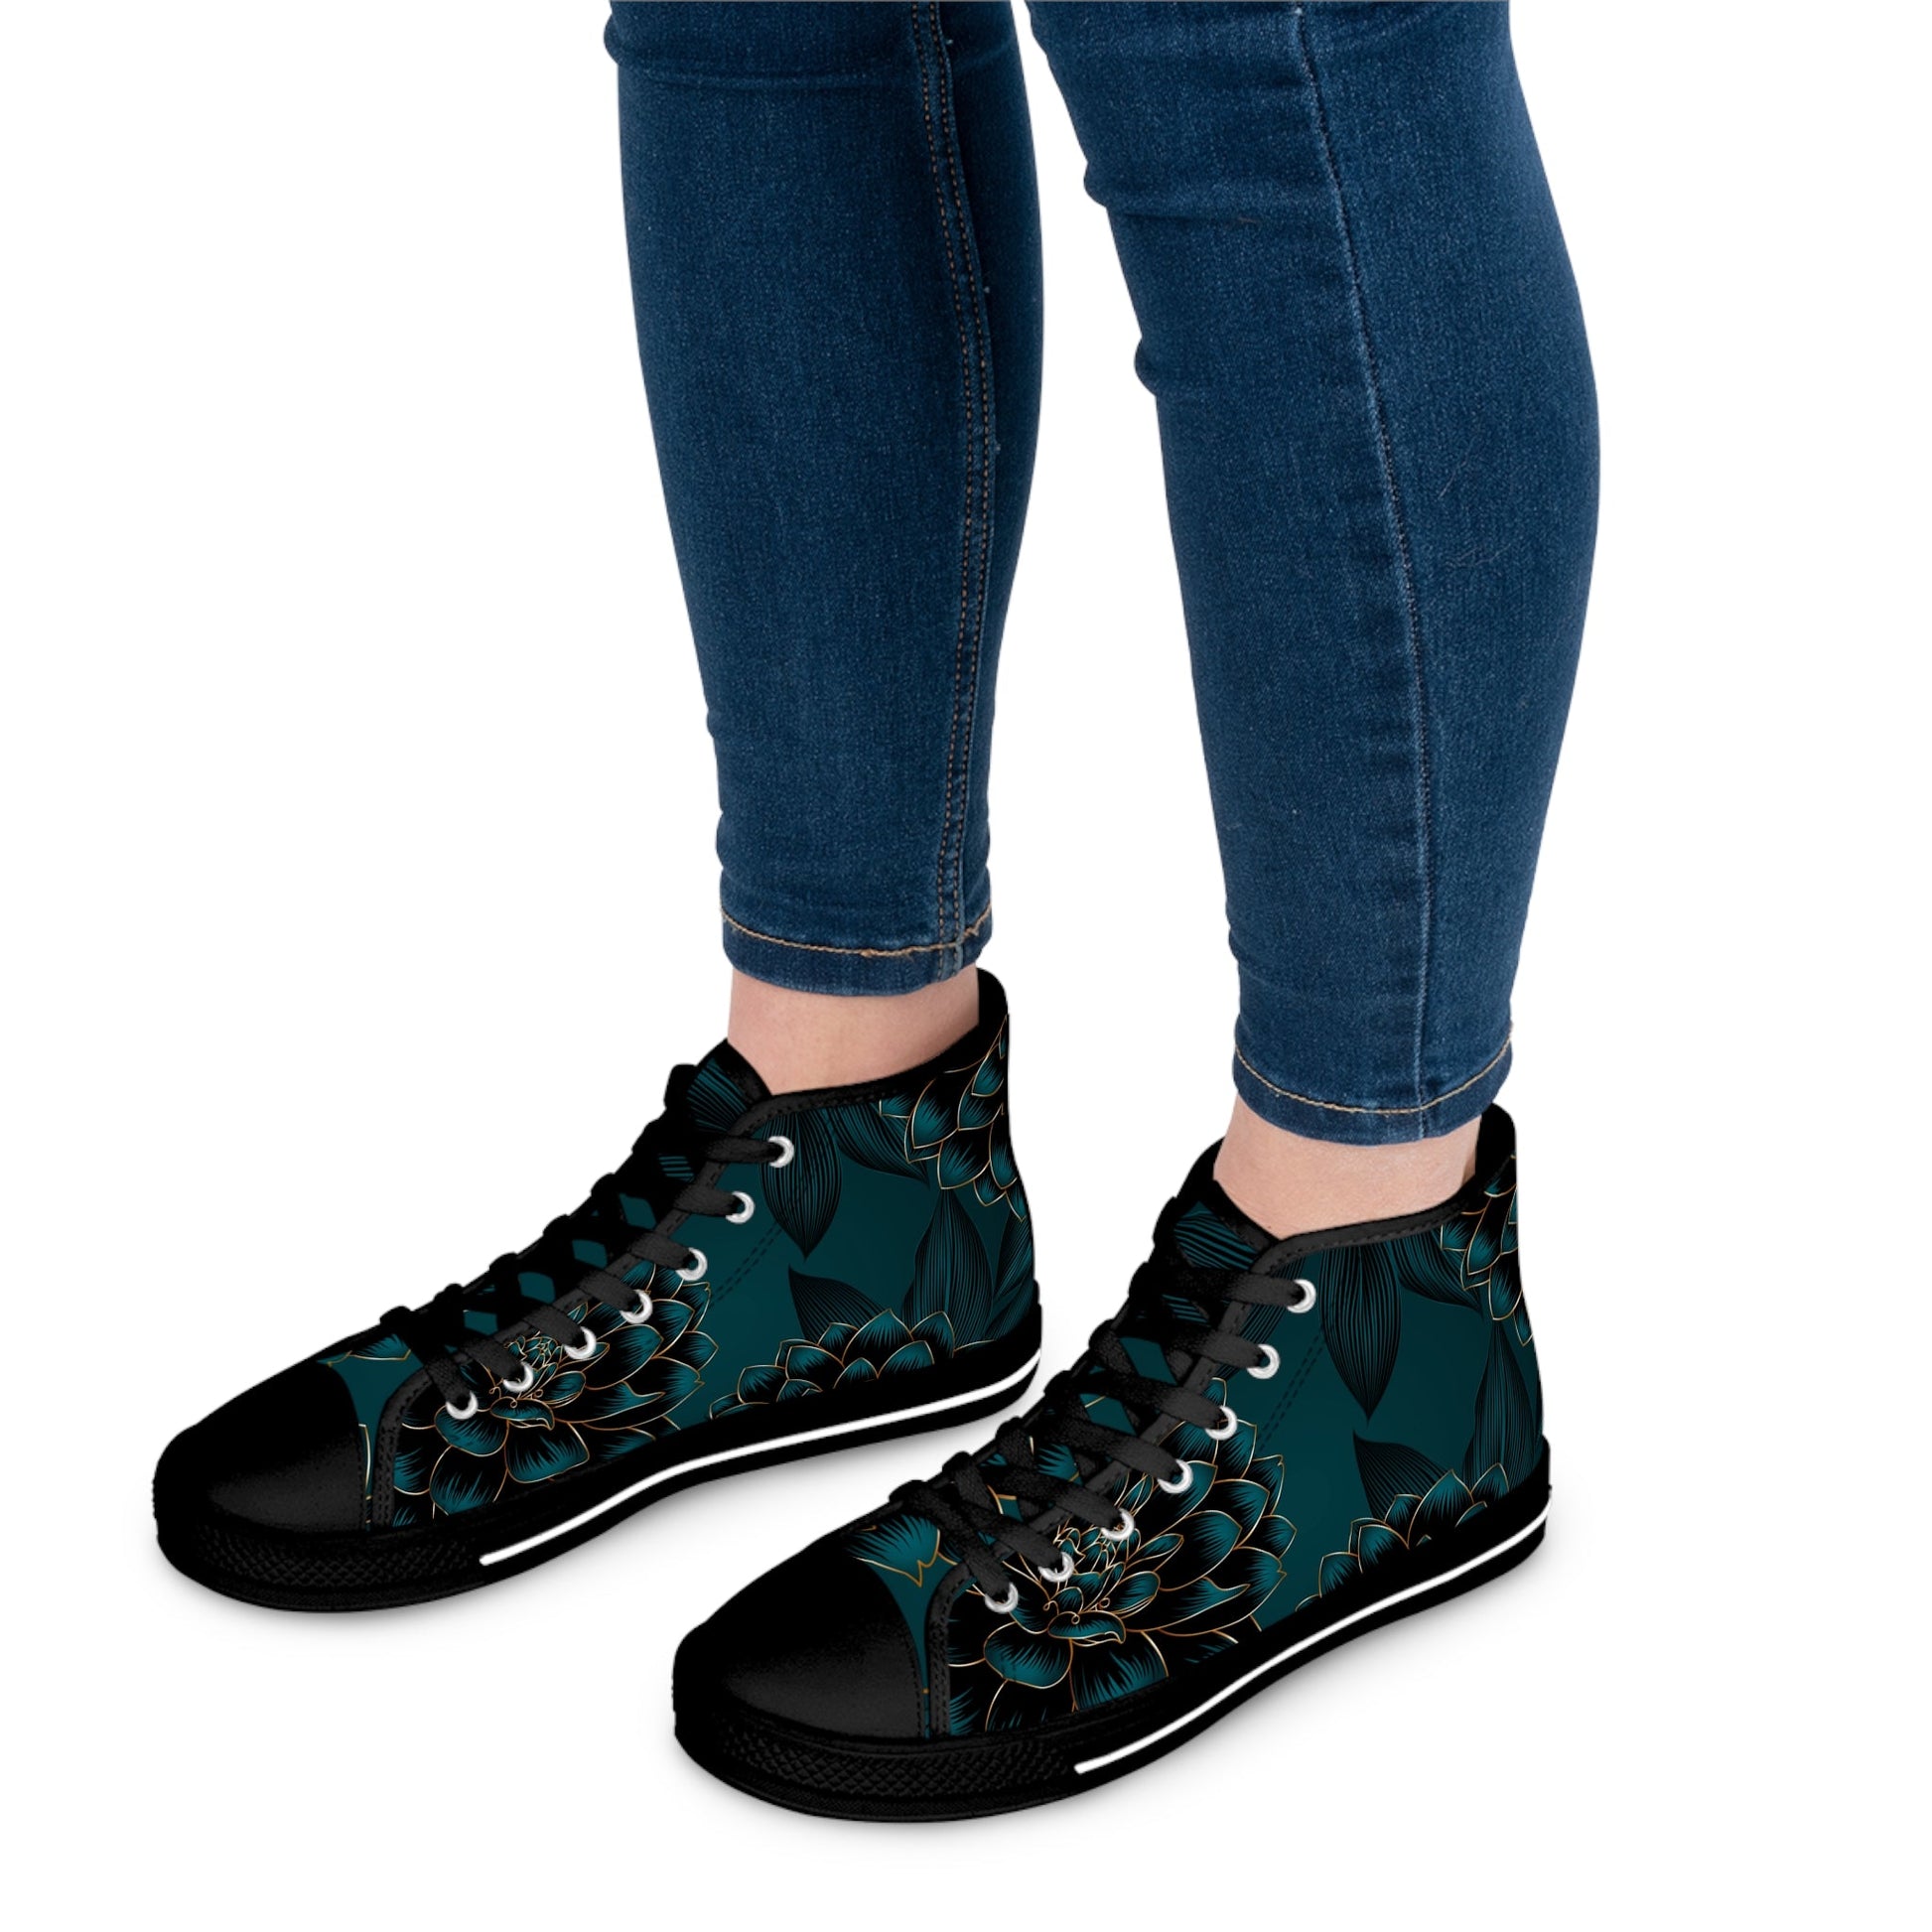 Shoes - Women's Floral High Top Sneakers